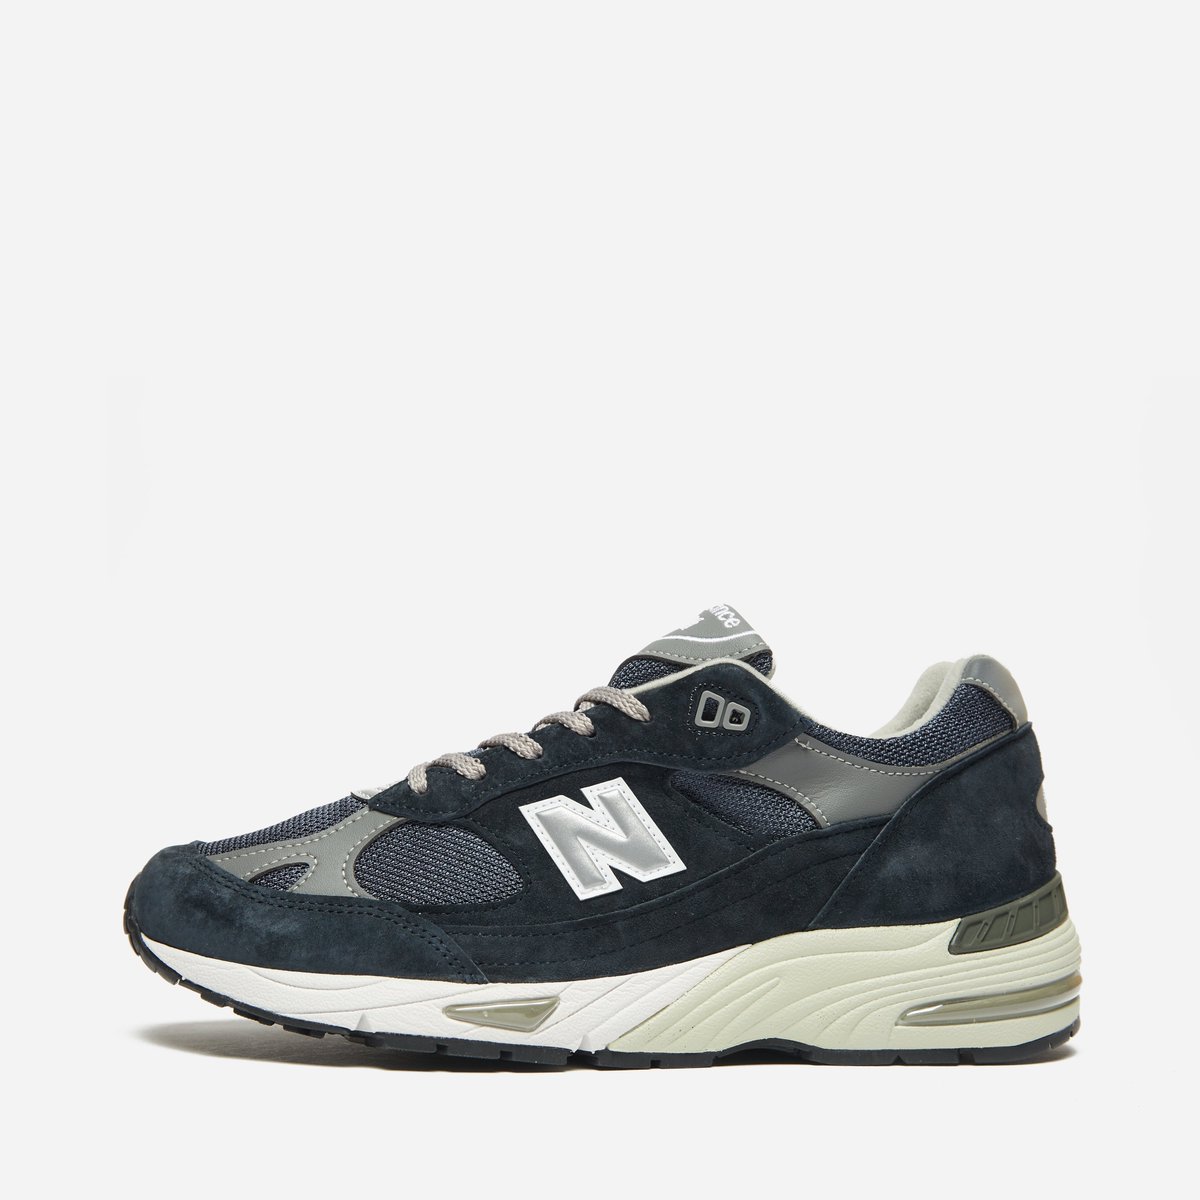 The 991 silhouette from New Balance is an essential for any footwear rotation all year round 🇬🇧 bit.ly/35dOqx7 #HIP #NewBalance